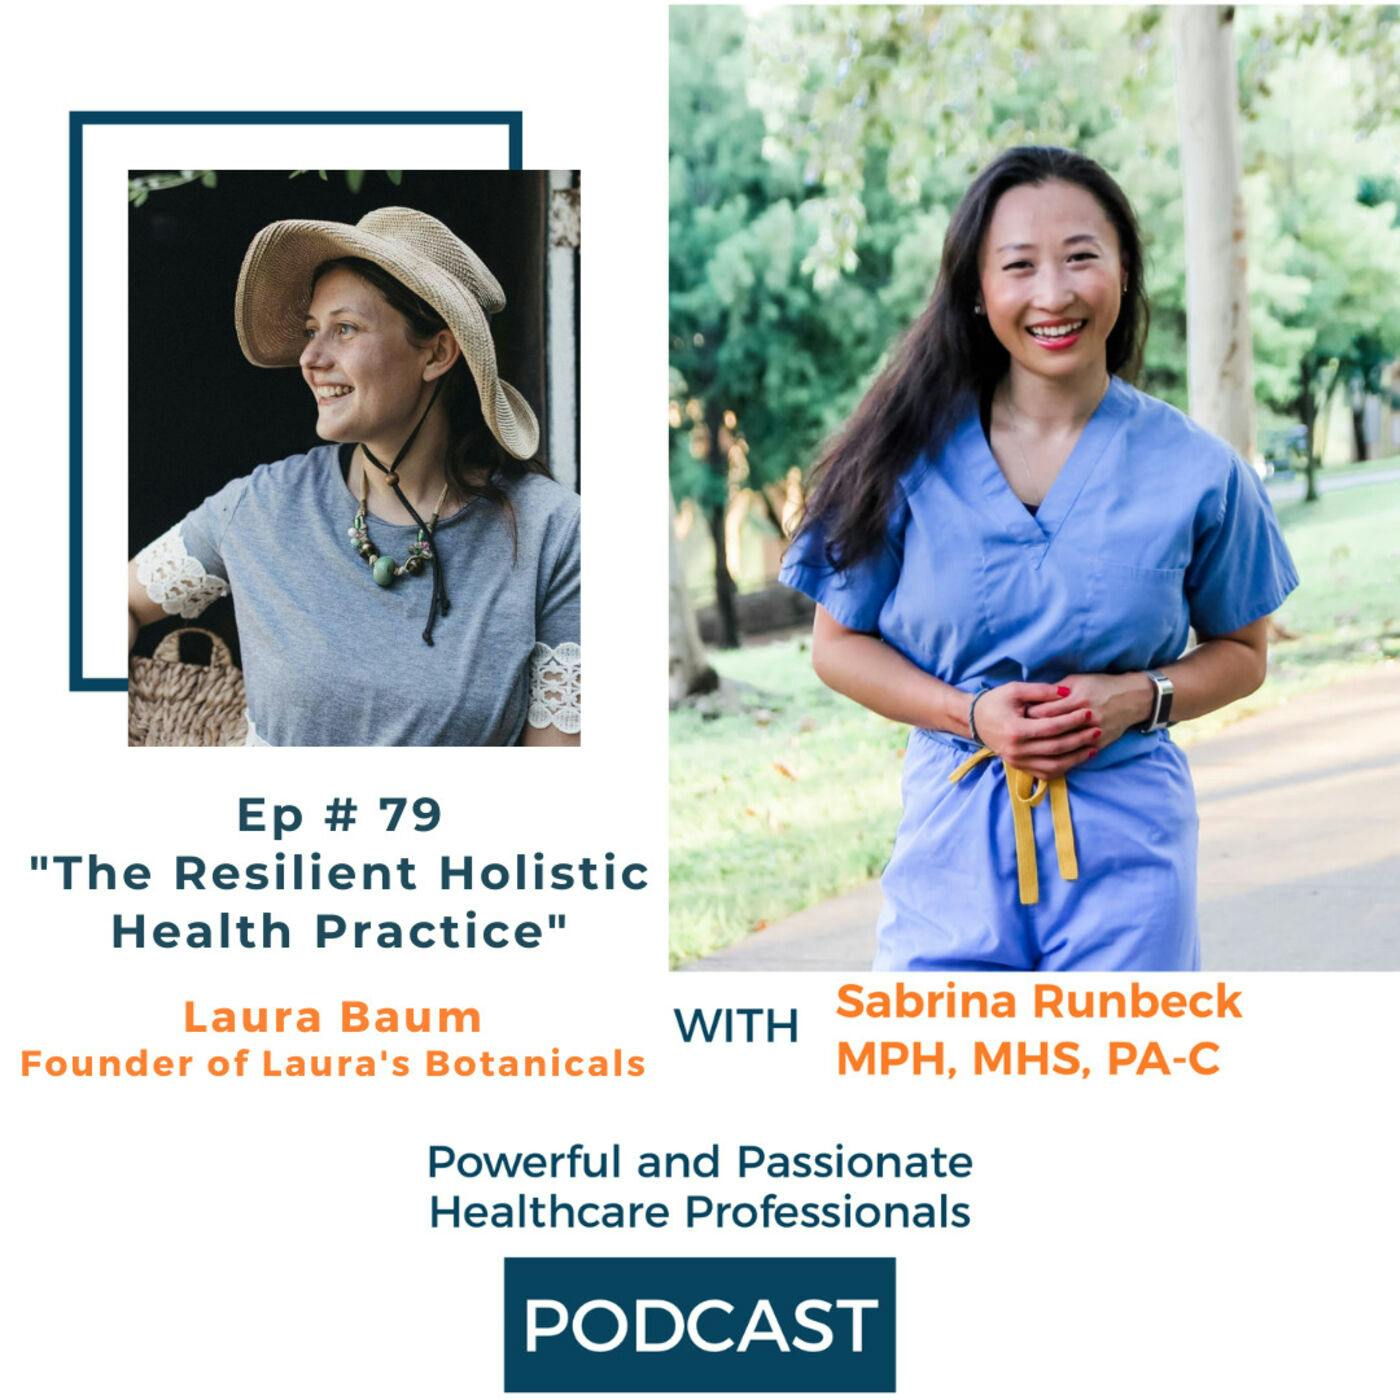 Ep 79 – The Resilient Holistic Health Practice with Laura Baum